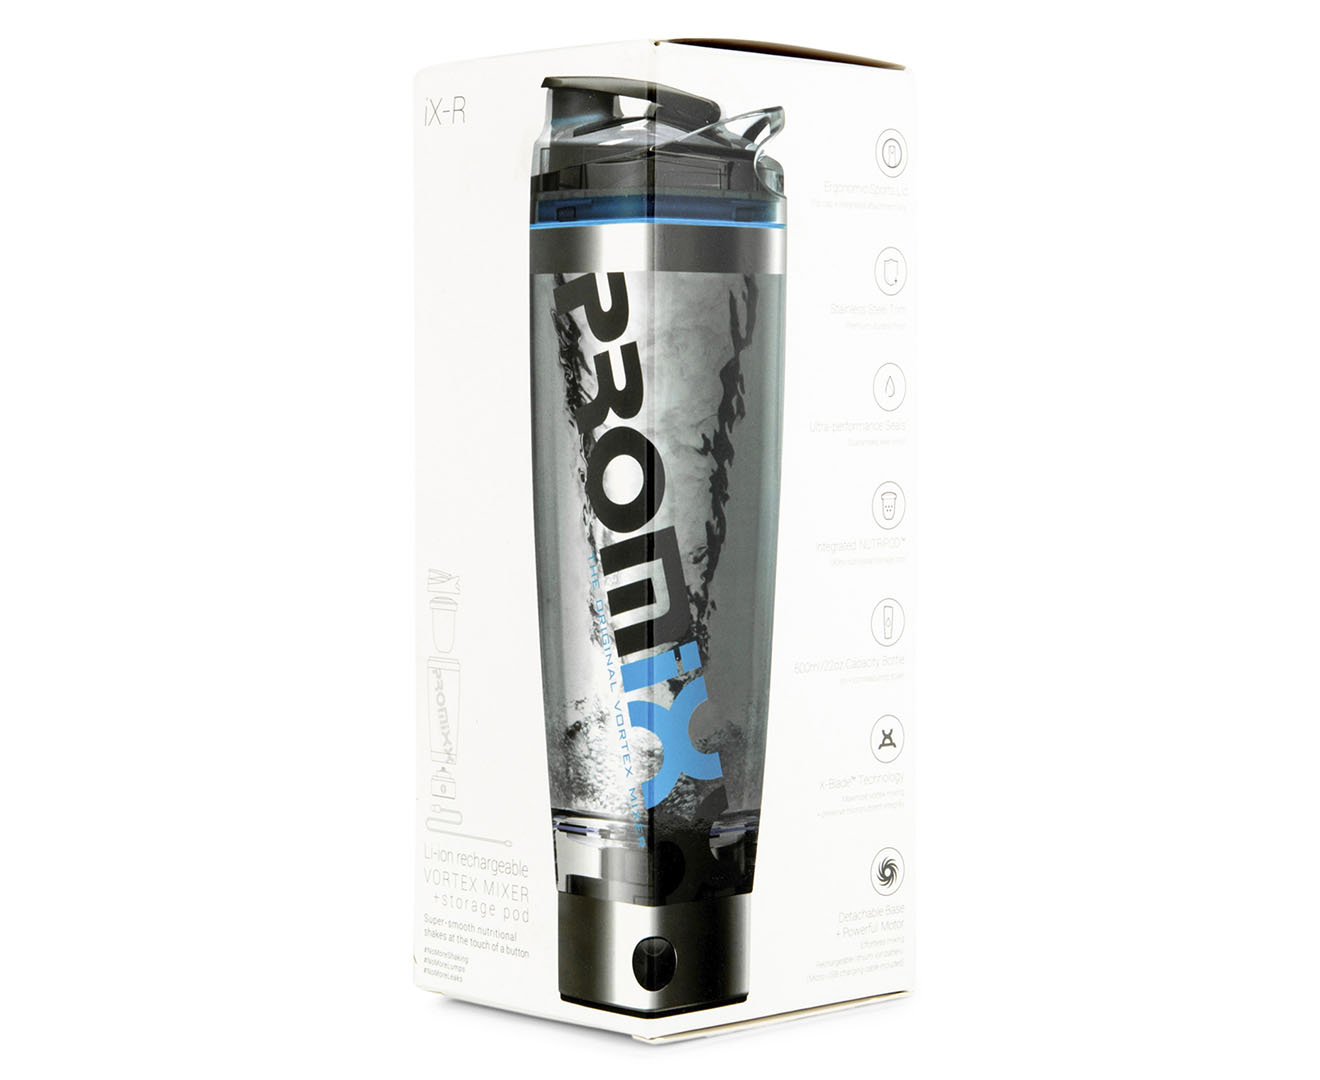 The Promixx iXR Is The Smooth, Stylish Way To Make Shakes On The